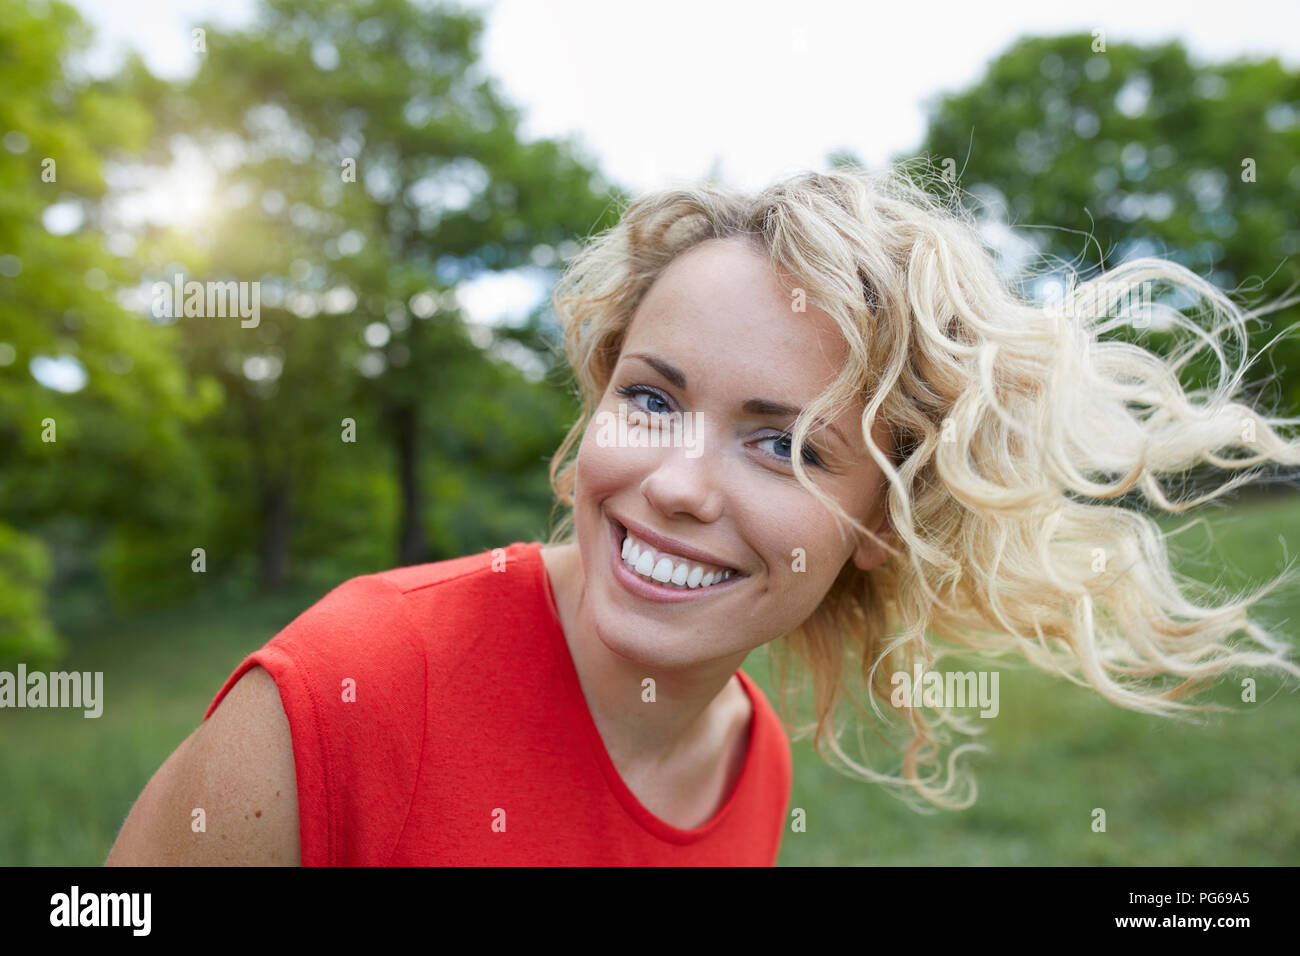 Portrait of smiling blond woman  wearing red t-shirt outdoors Stock Photo